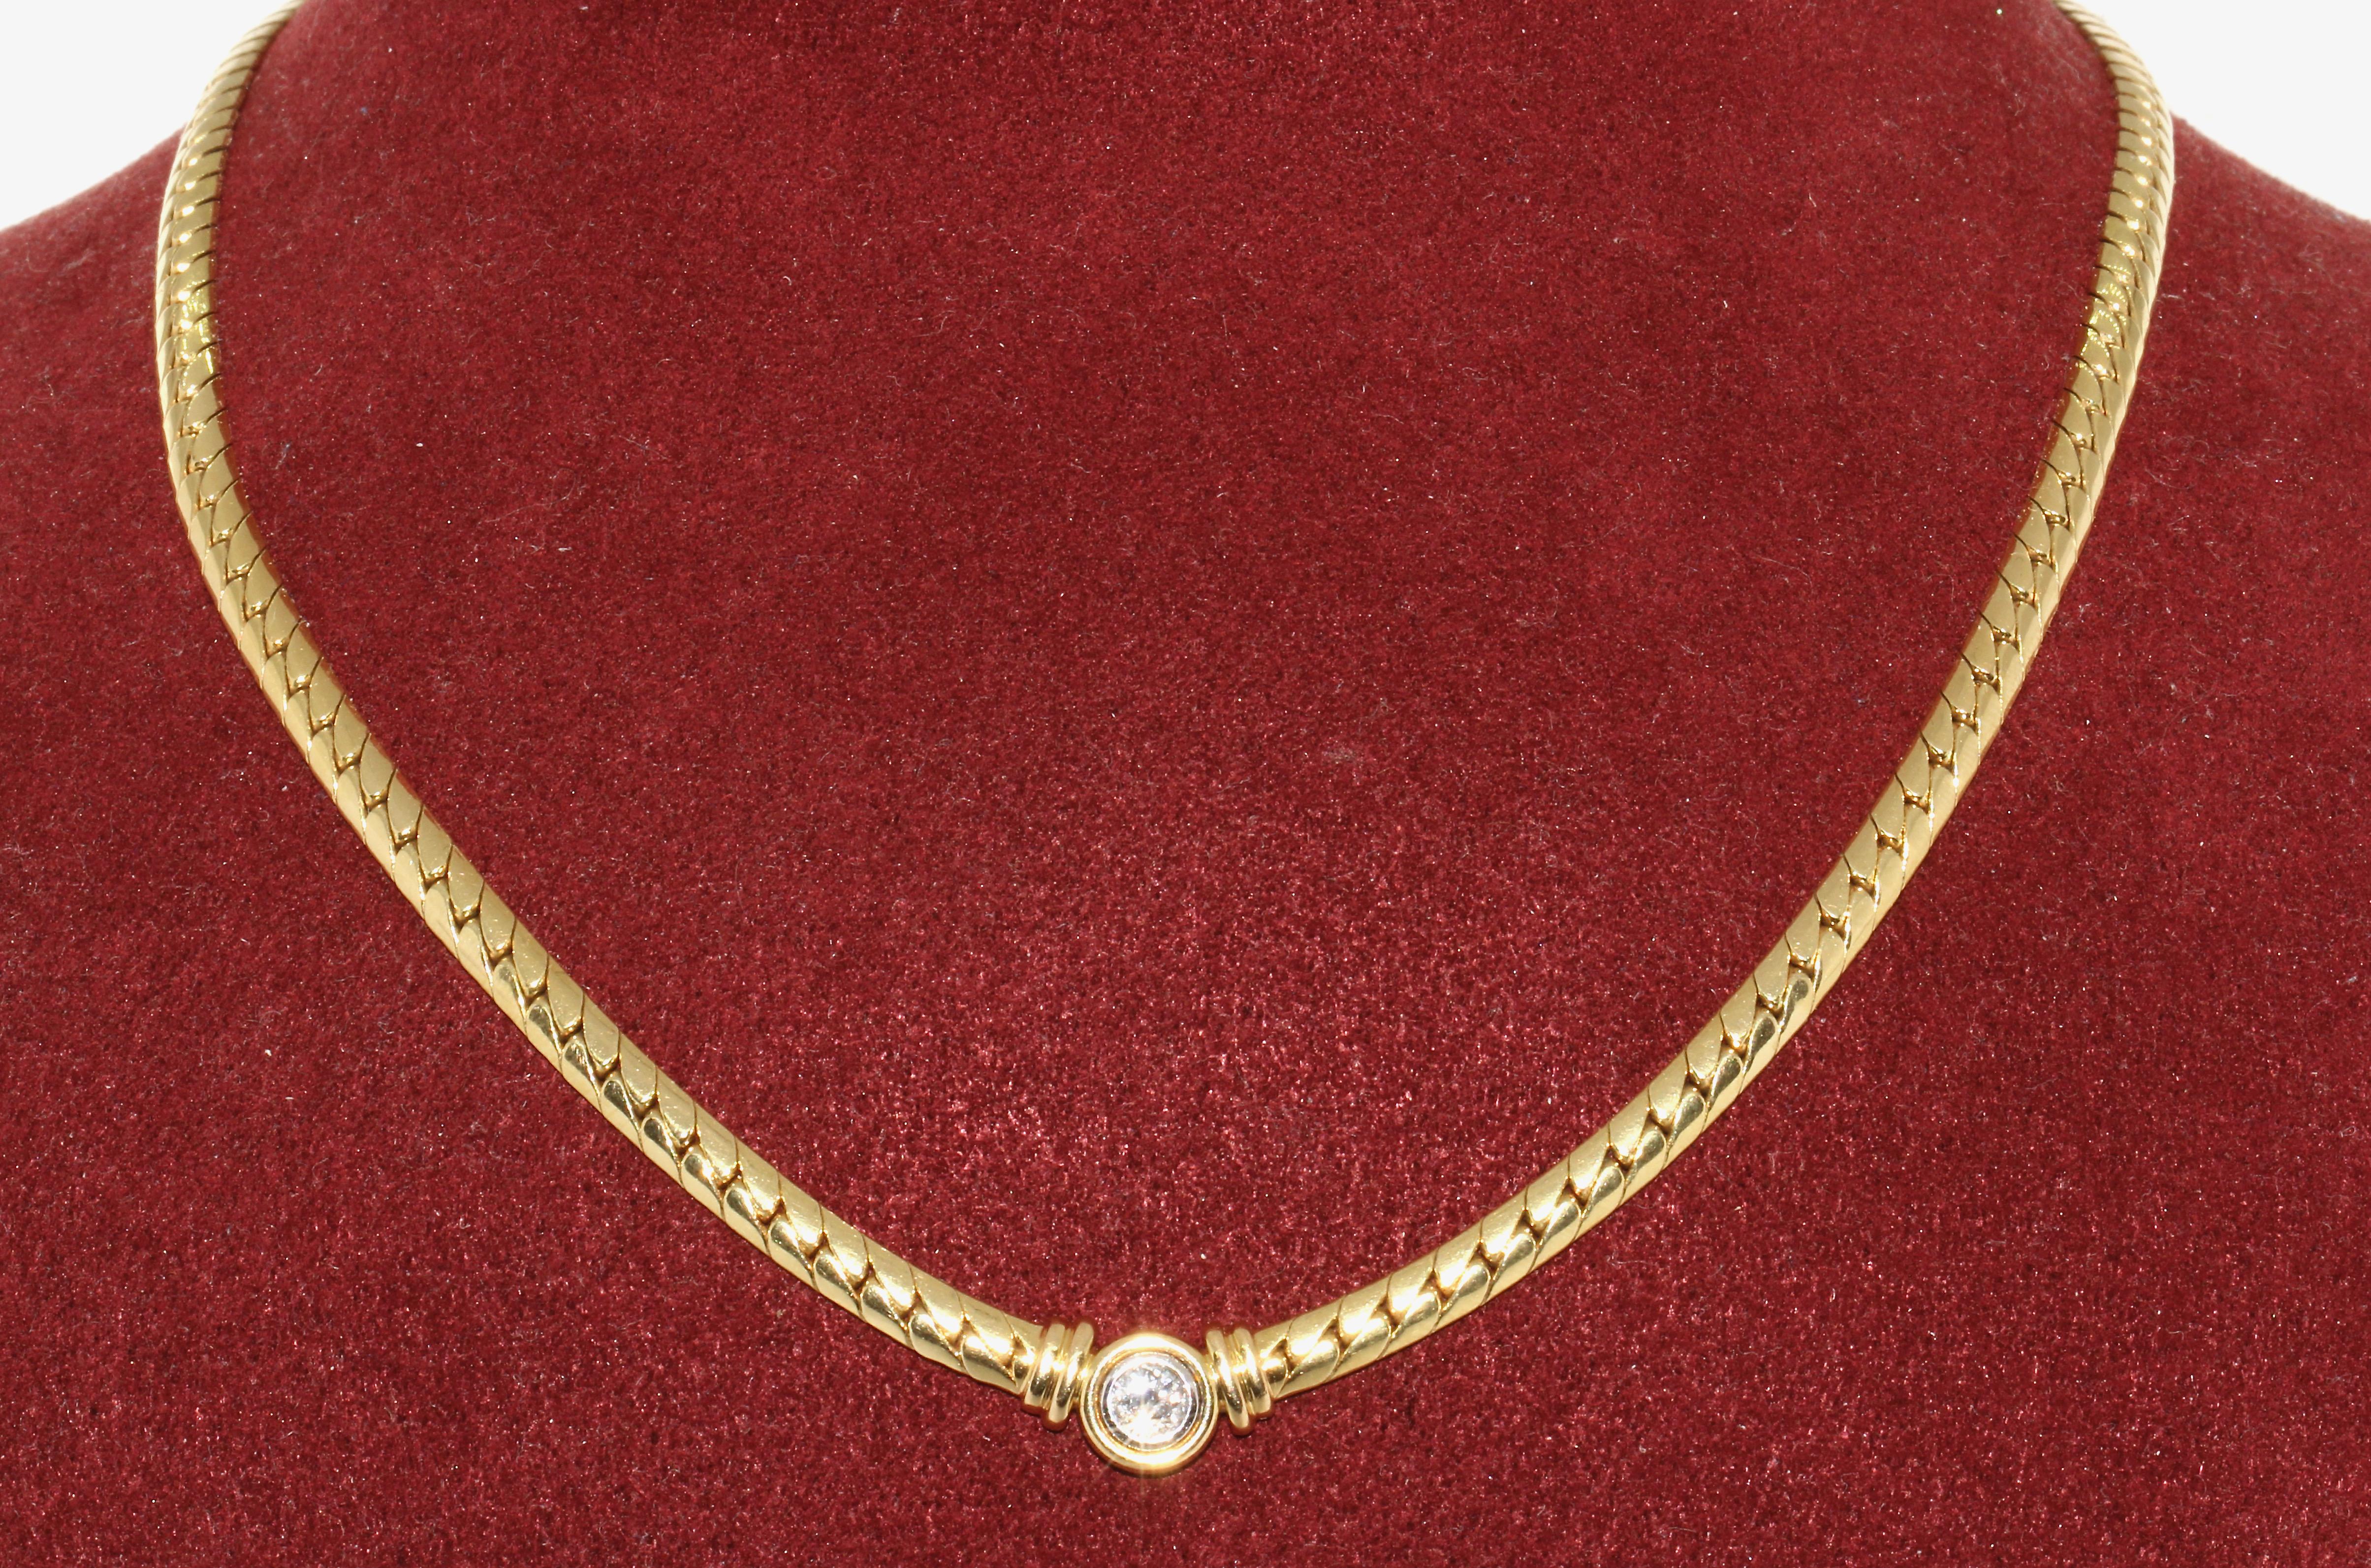 Round Cut 18 Karat Yellow Gold Necklace with 0.27 Carat White Diamond Solitaire For Sale